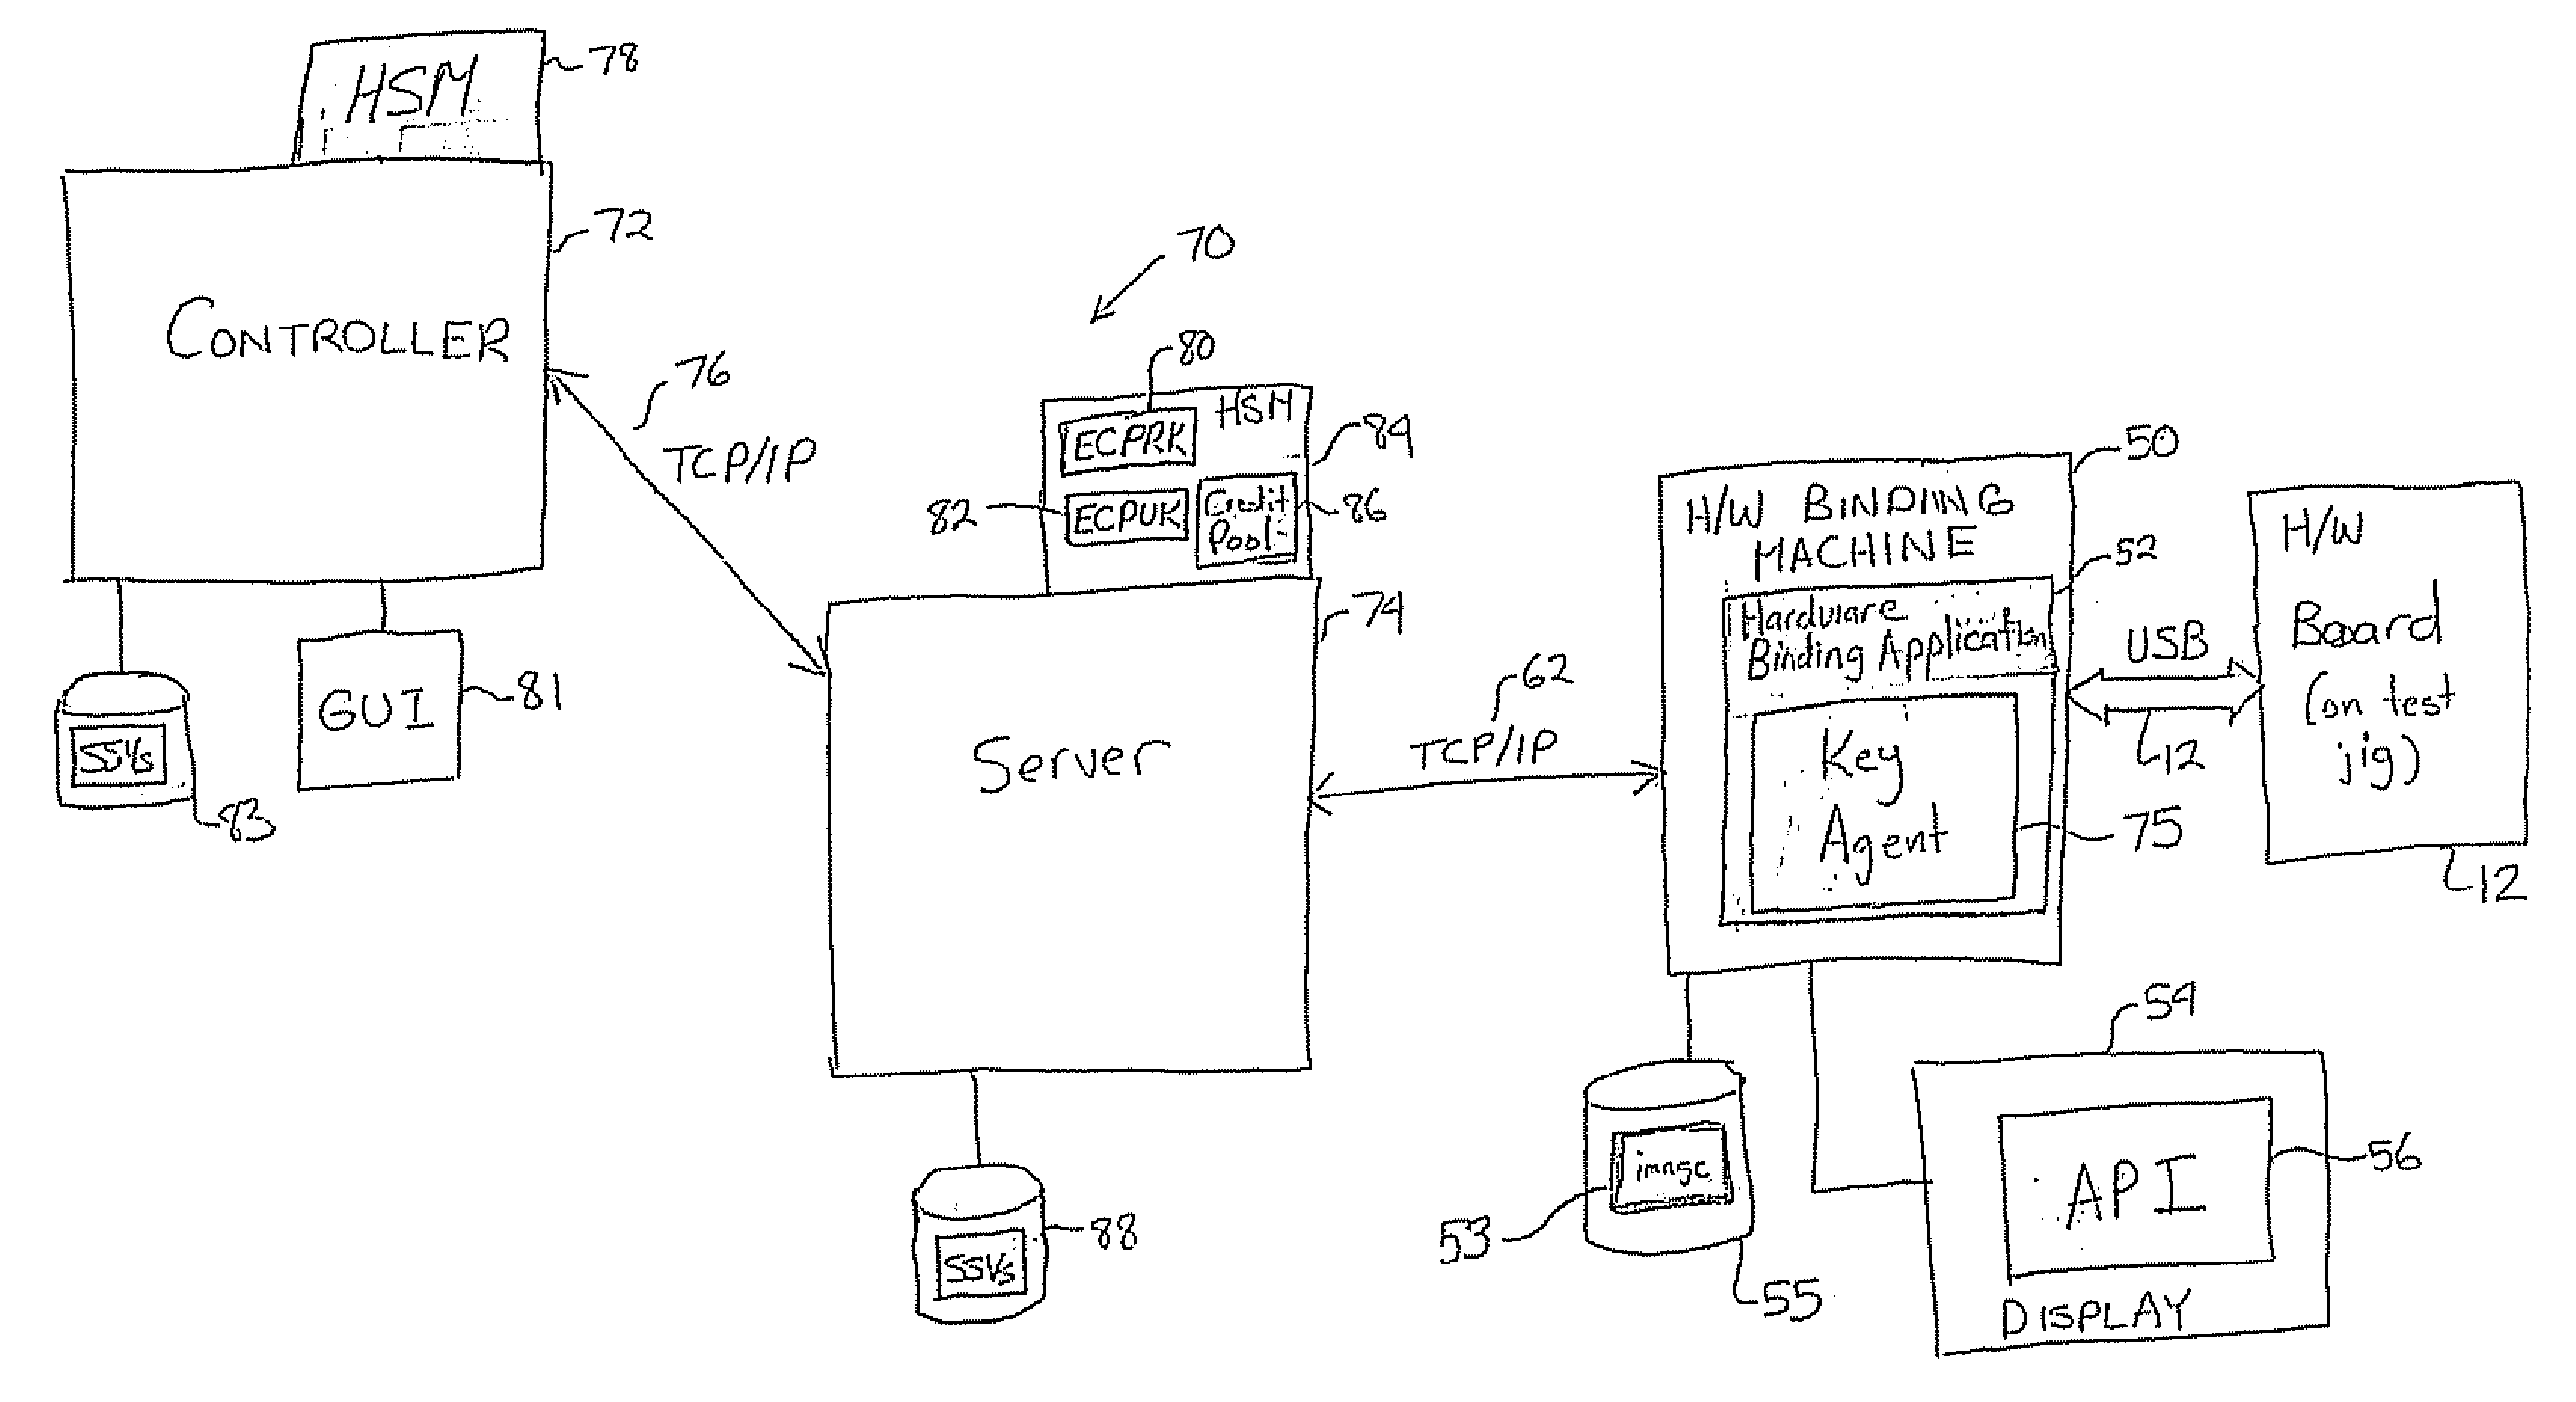 System and method for authenticating a gaming device